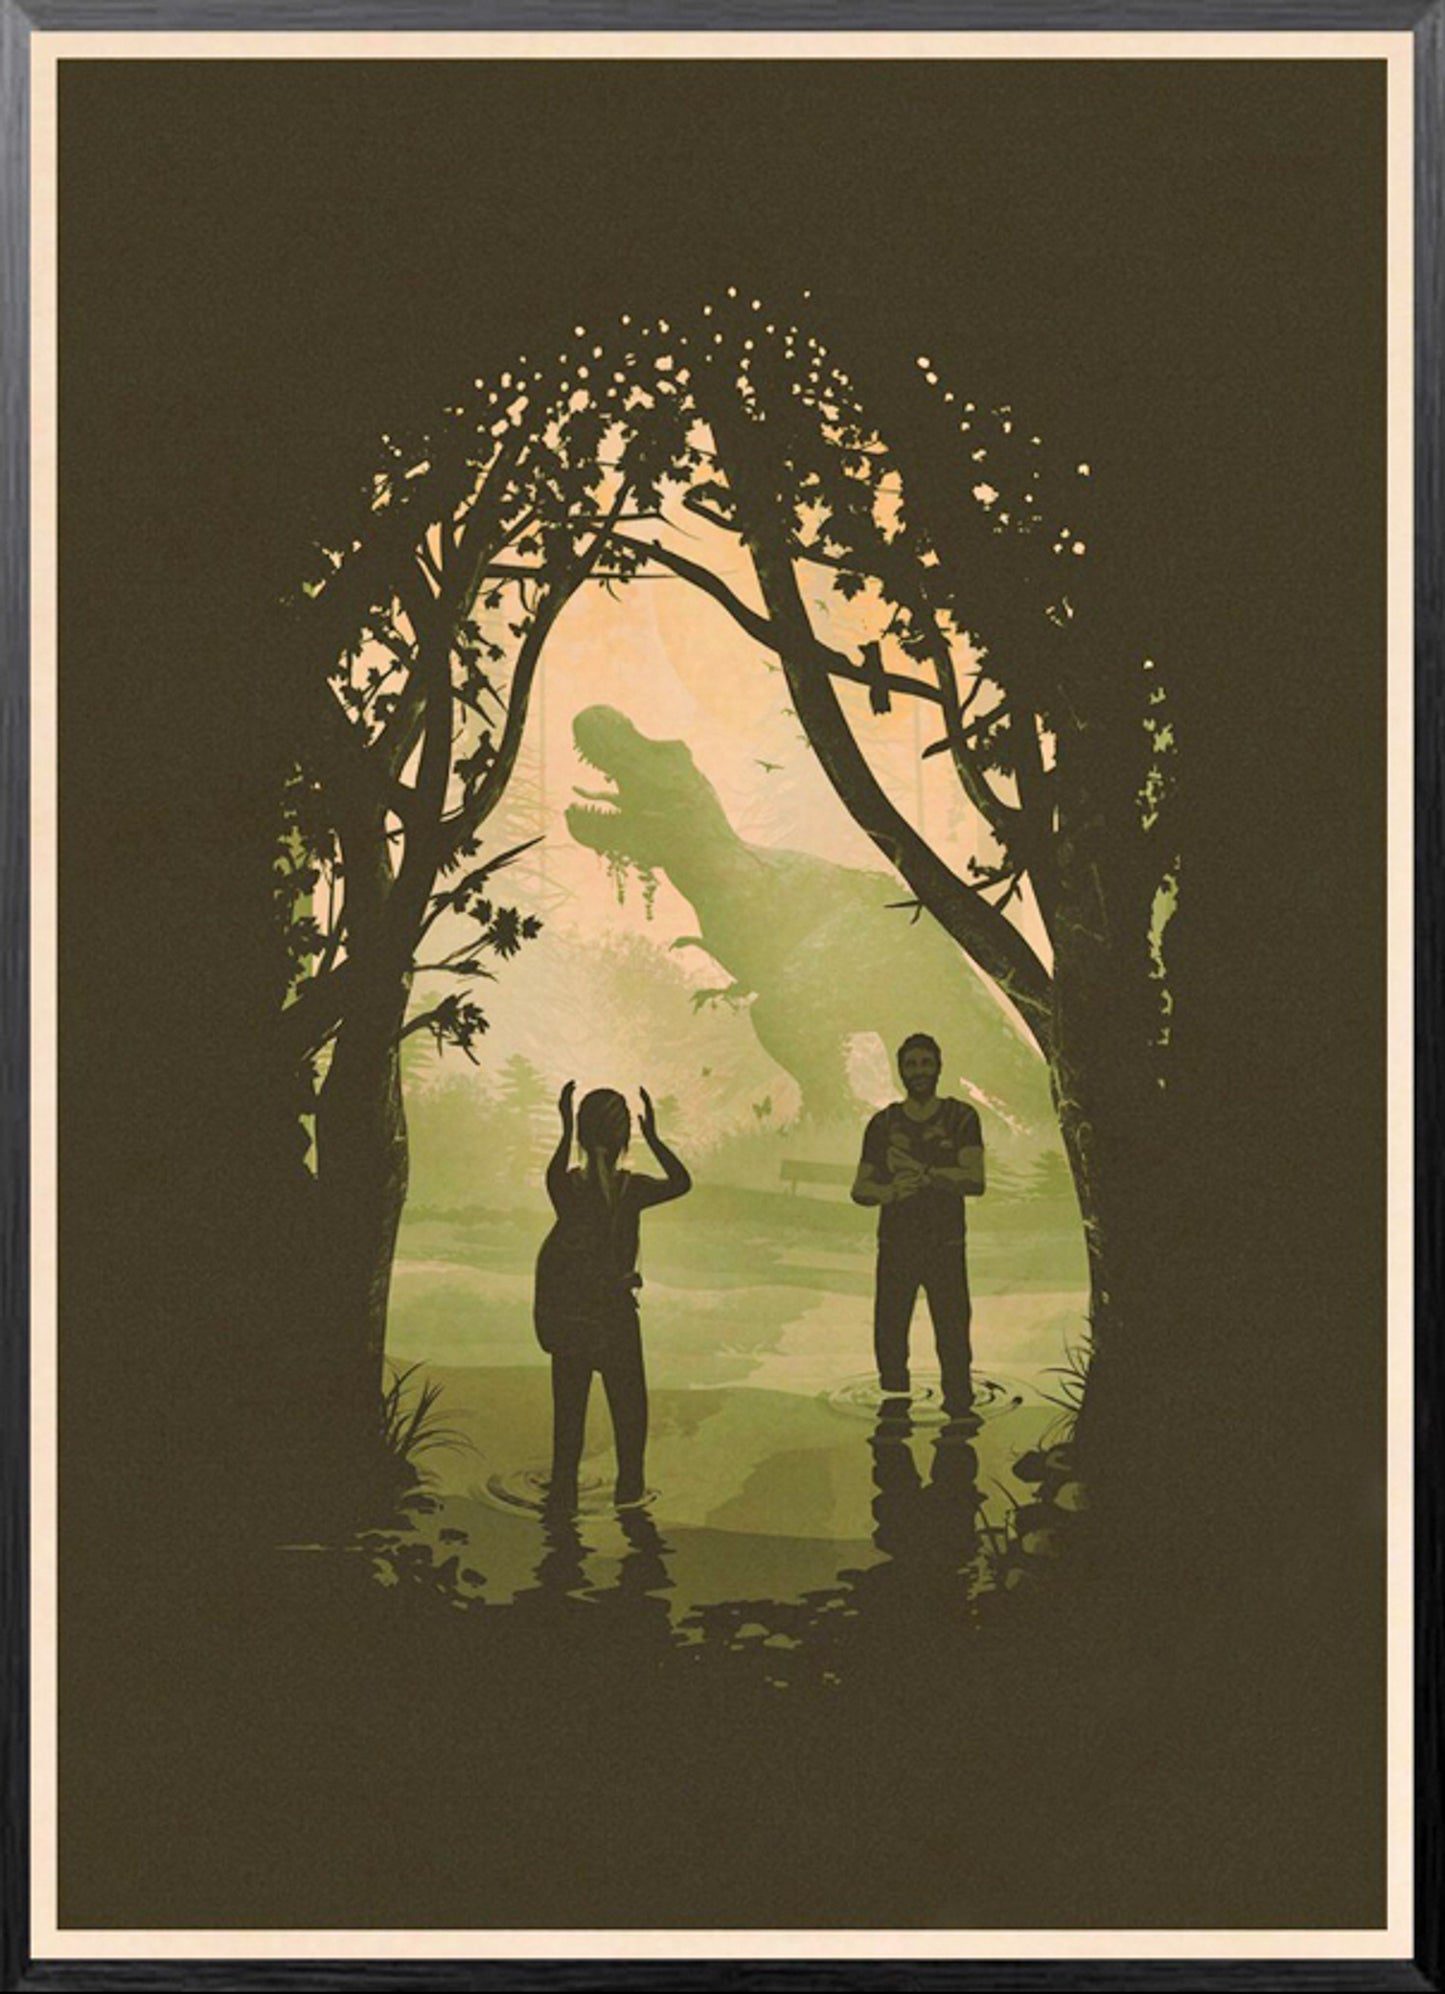 The Last of Us Aesthetic Poster